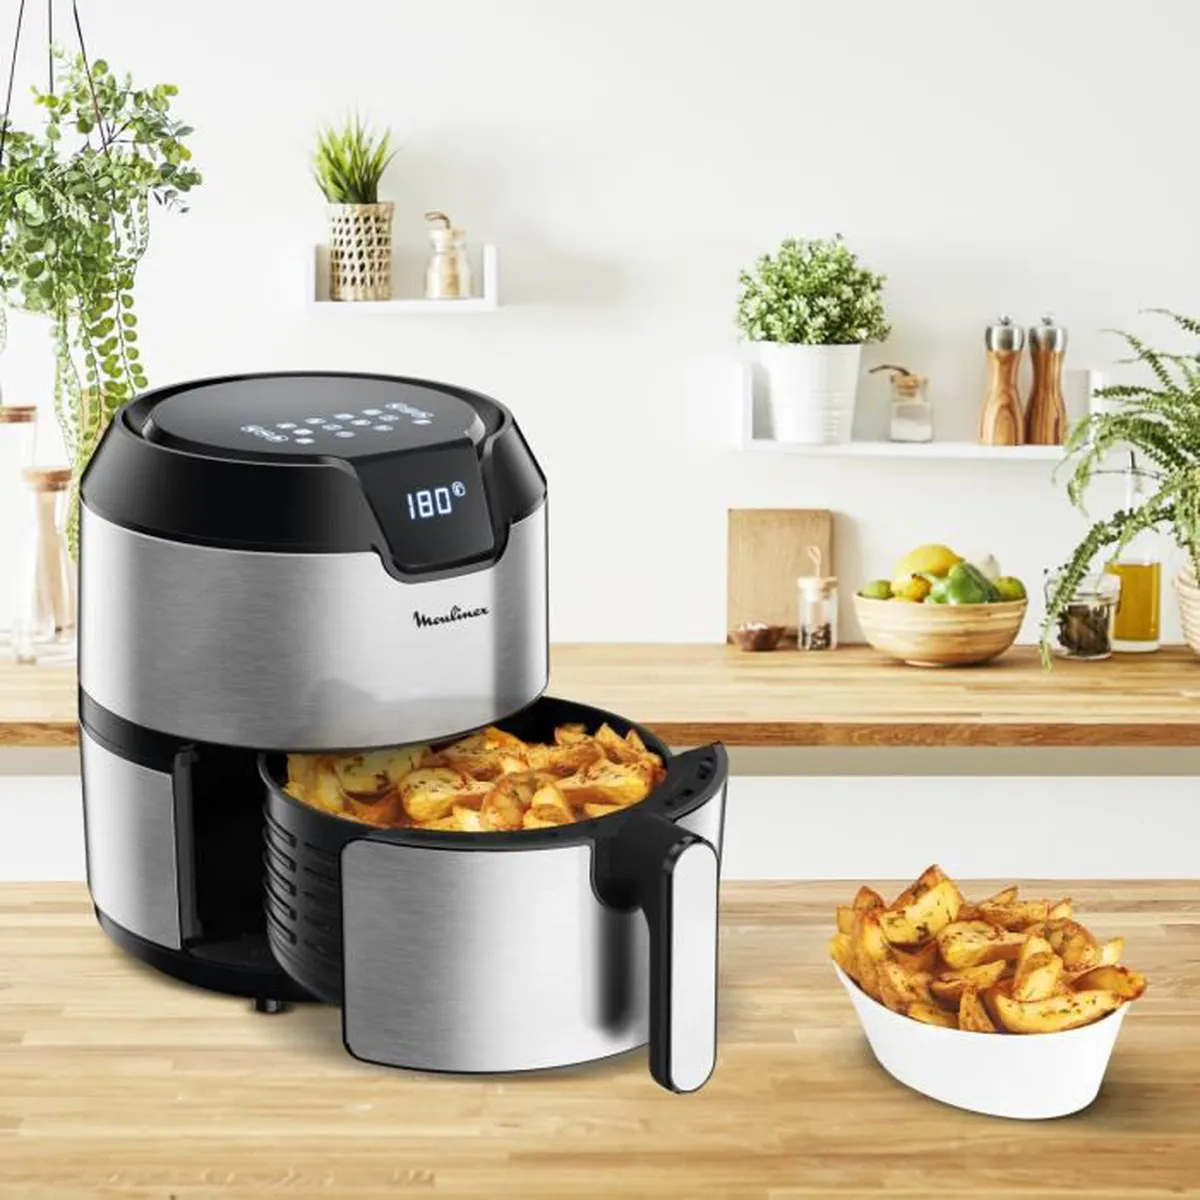 FRITEUSE MOULINEX EASY FRY 1500W